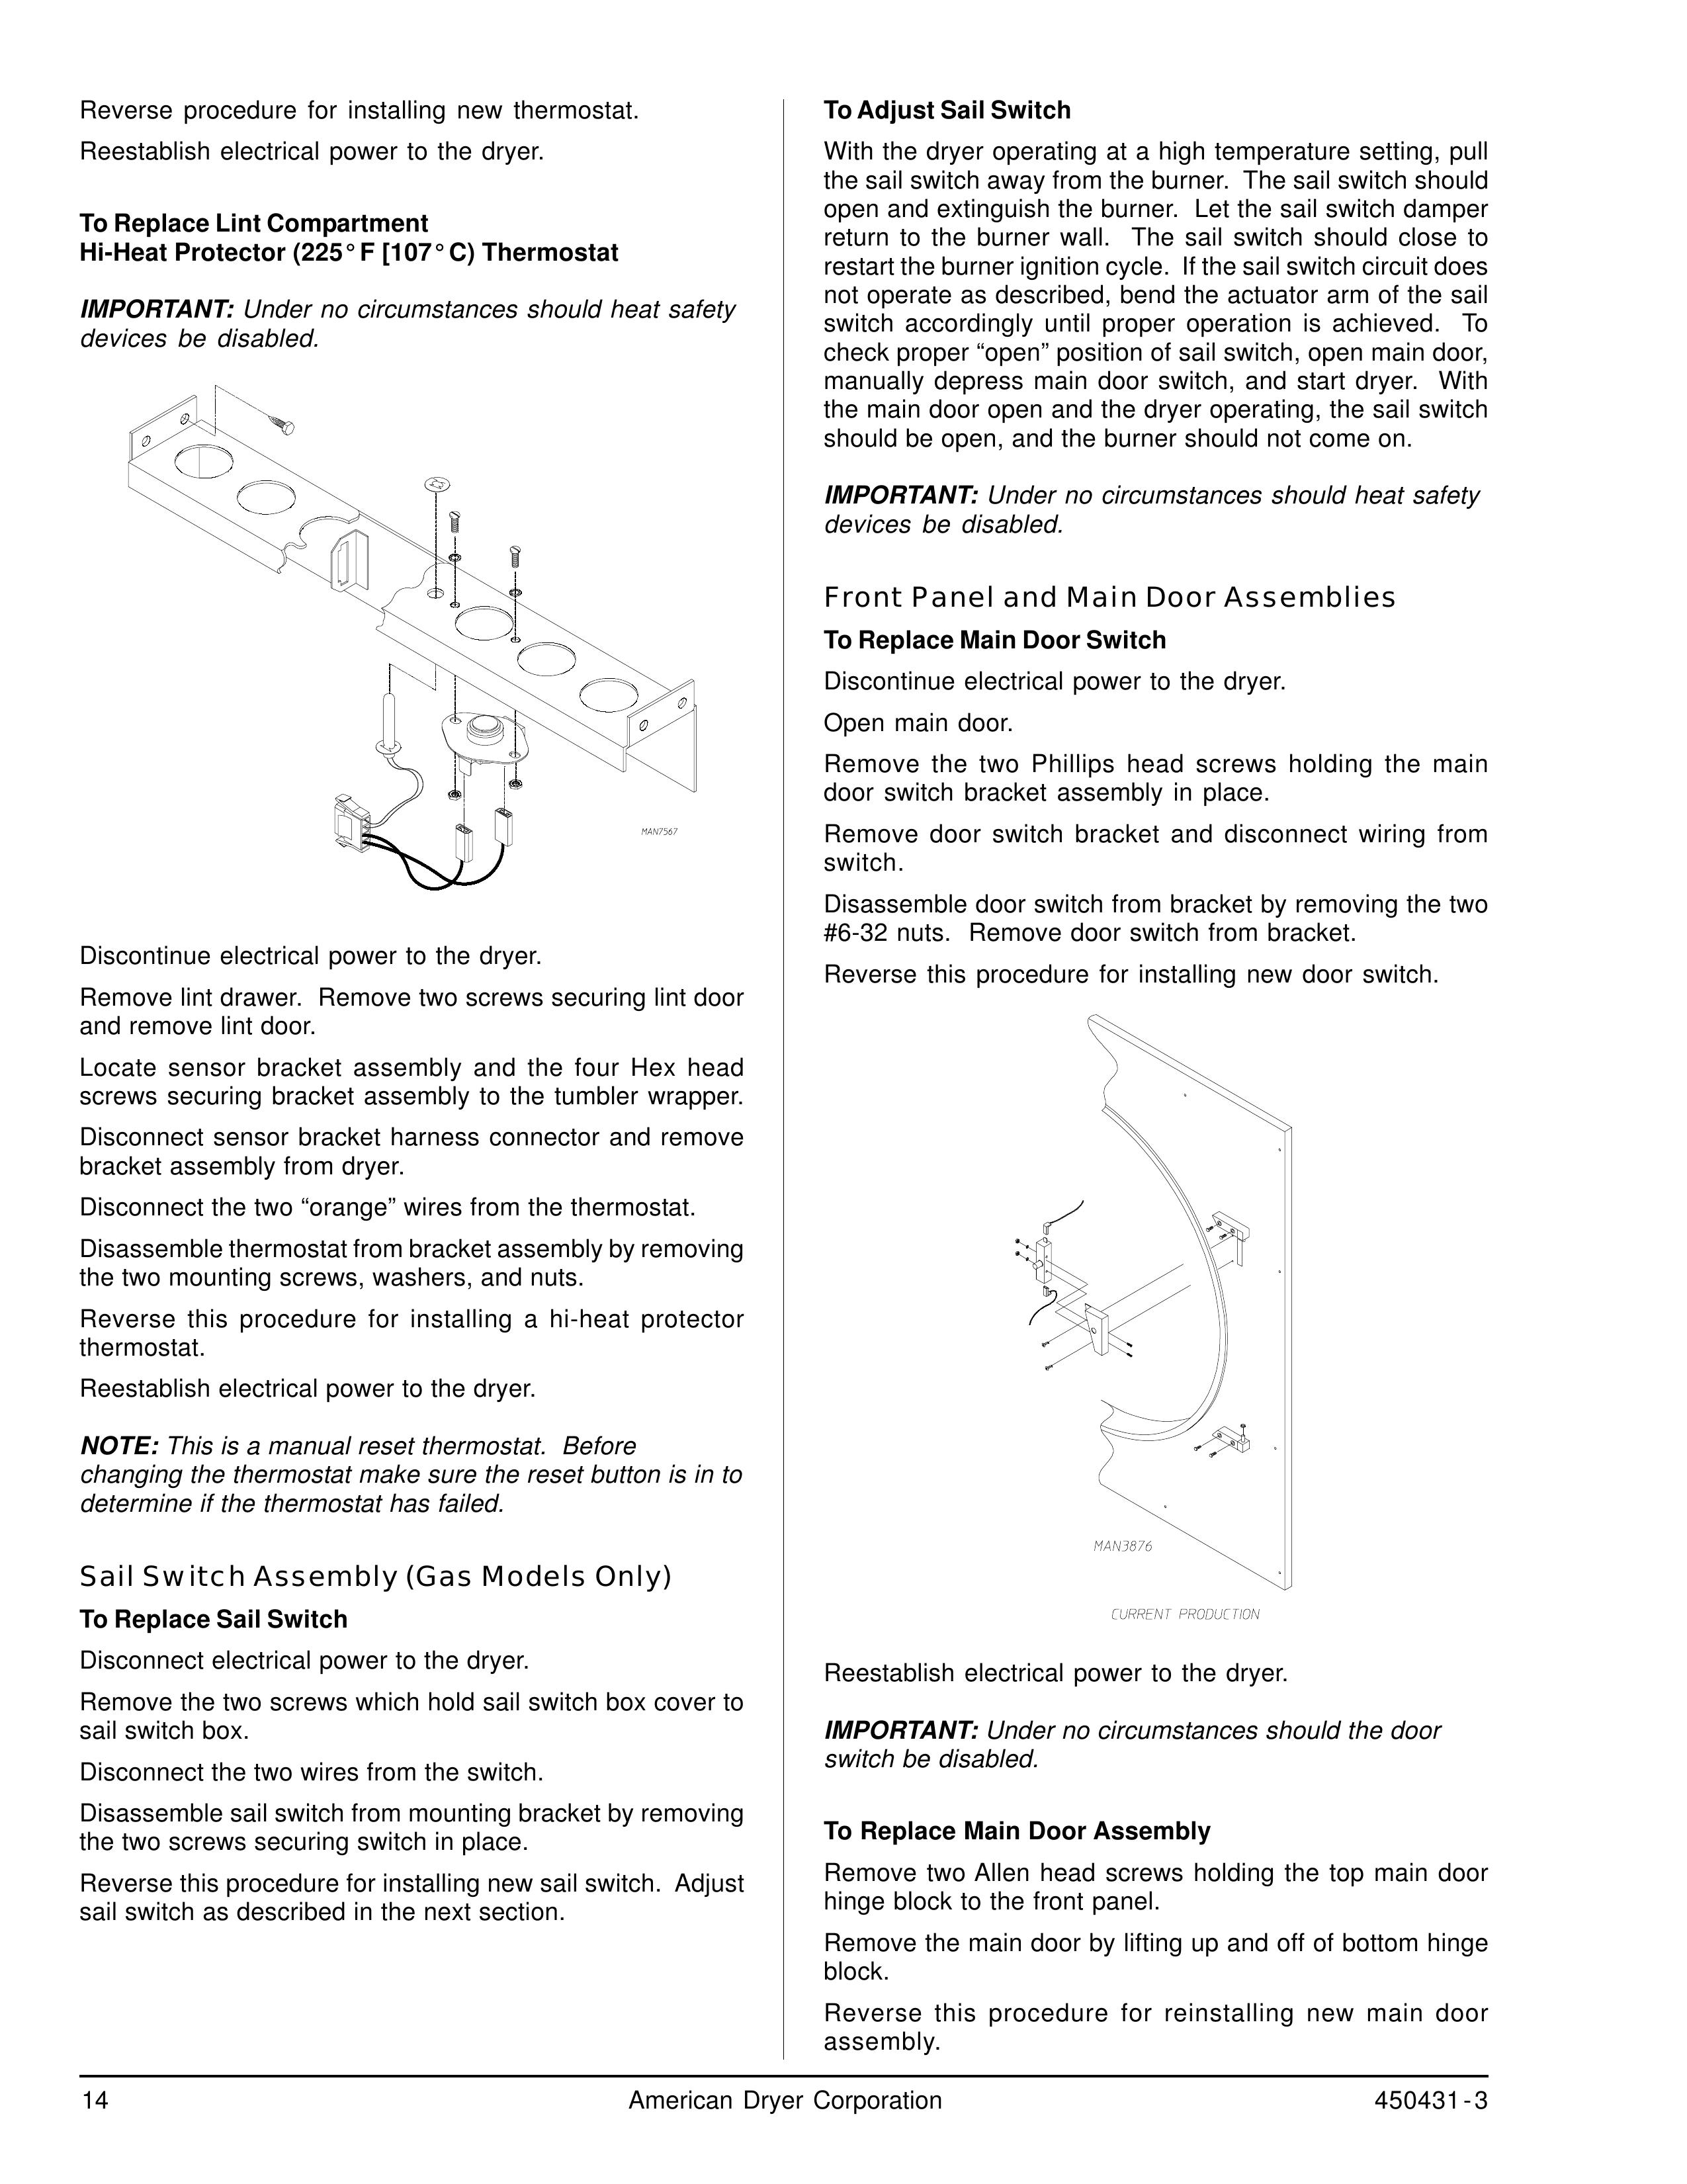 ADC ML-190 Clothes Dryer User Manual (Page 14)